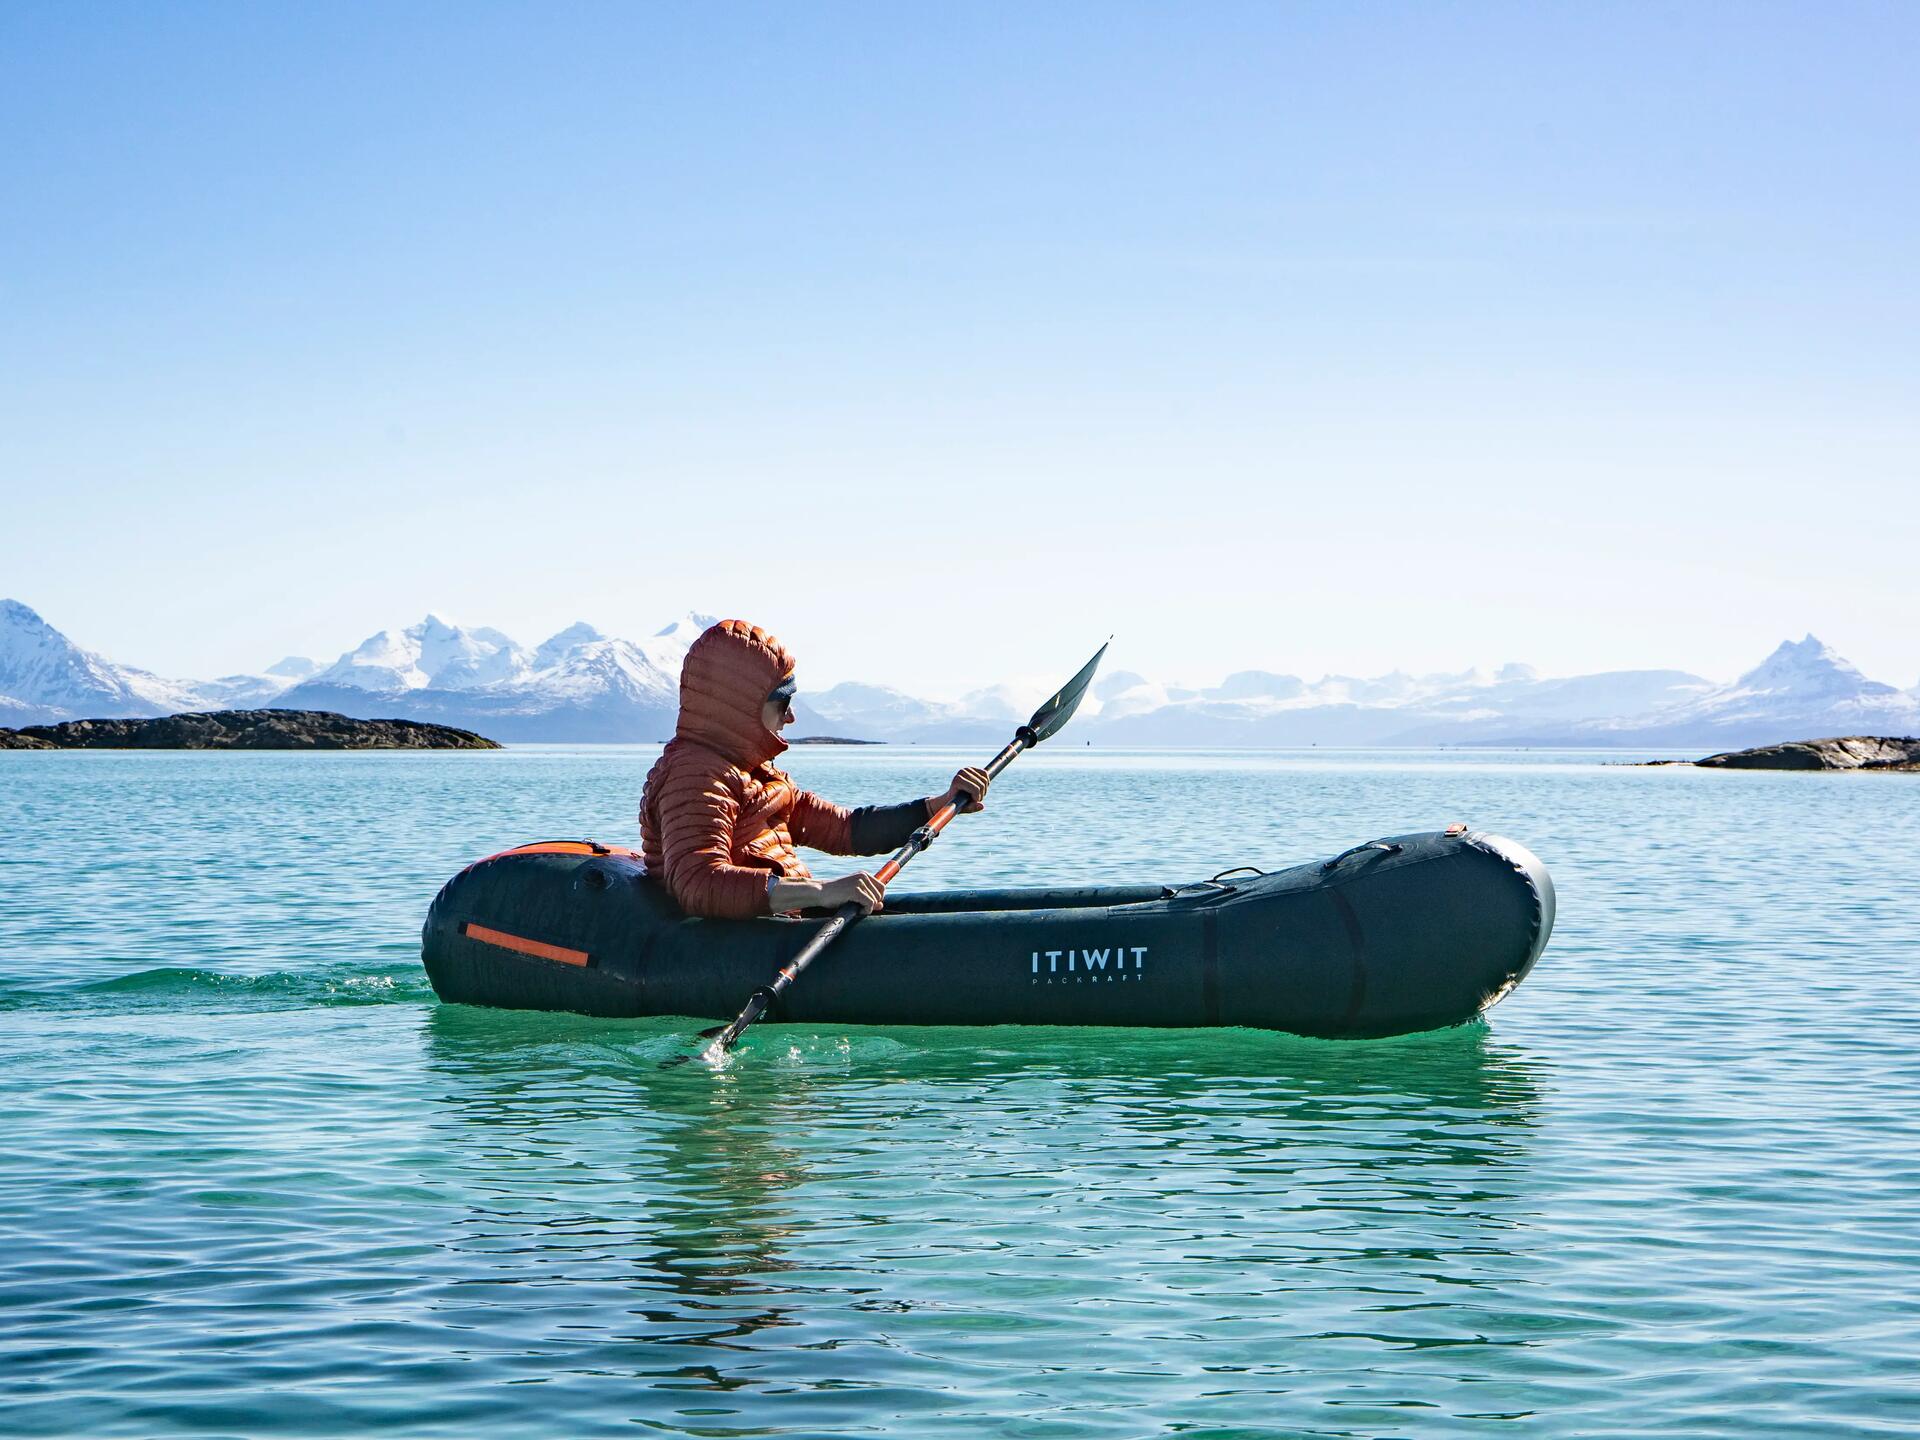 VAT BOLLE: an environmentally conscious cycling, packraft and snowboarding adventure film!